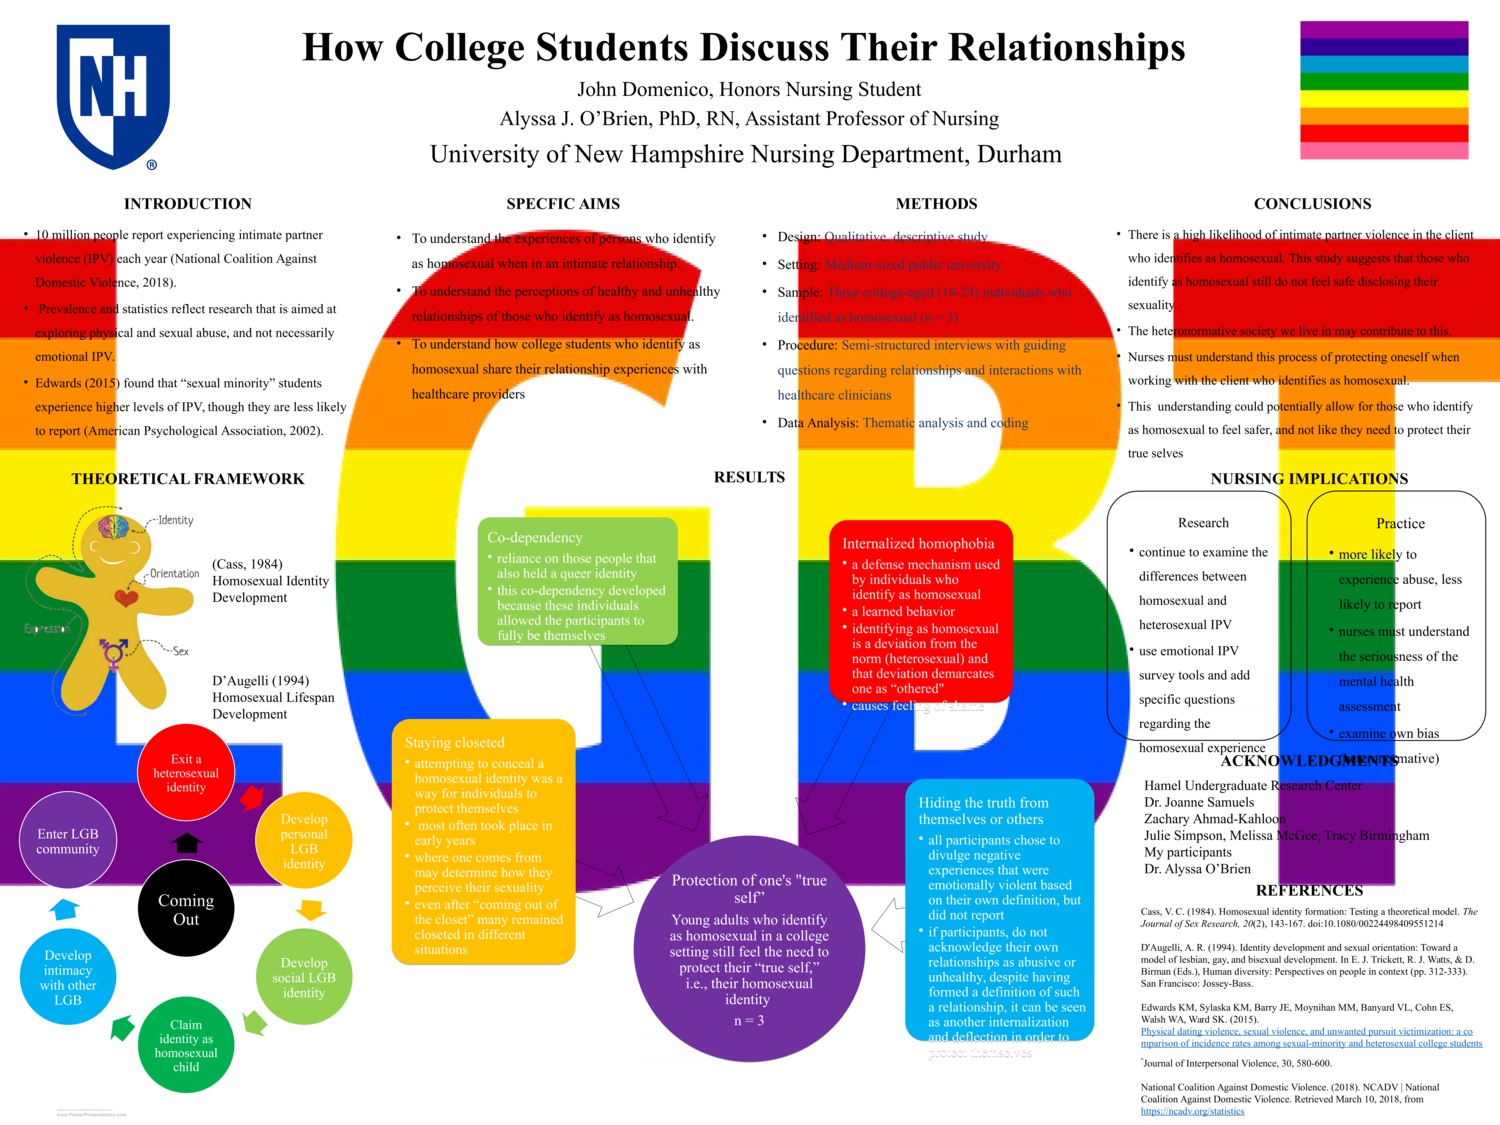 How College Students Discuss Their Relationships by jrd2006